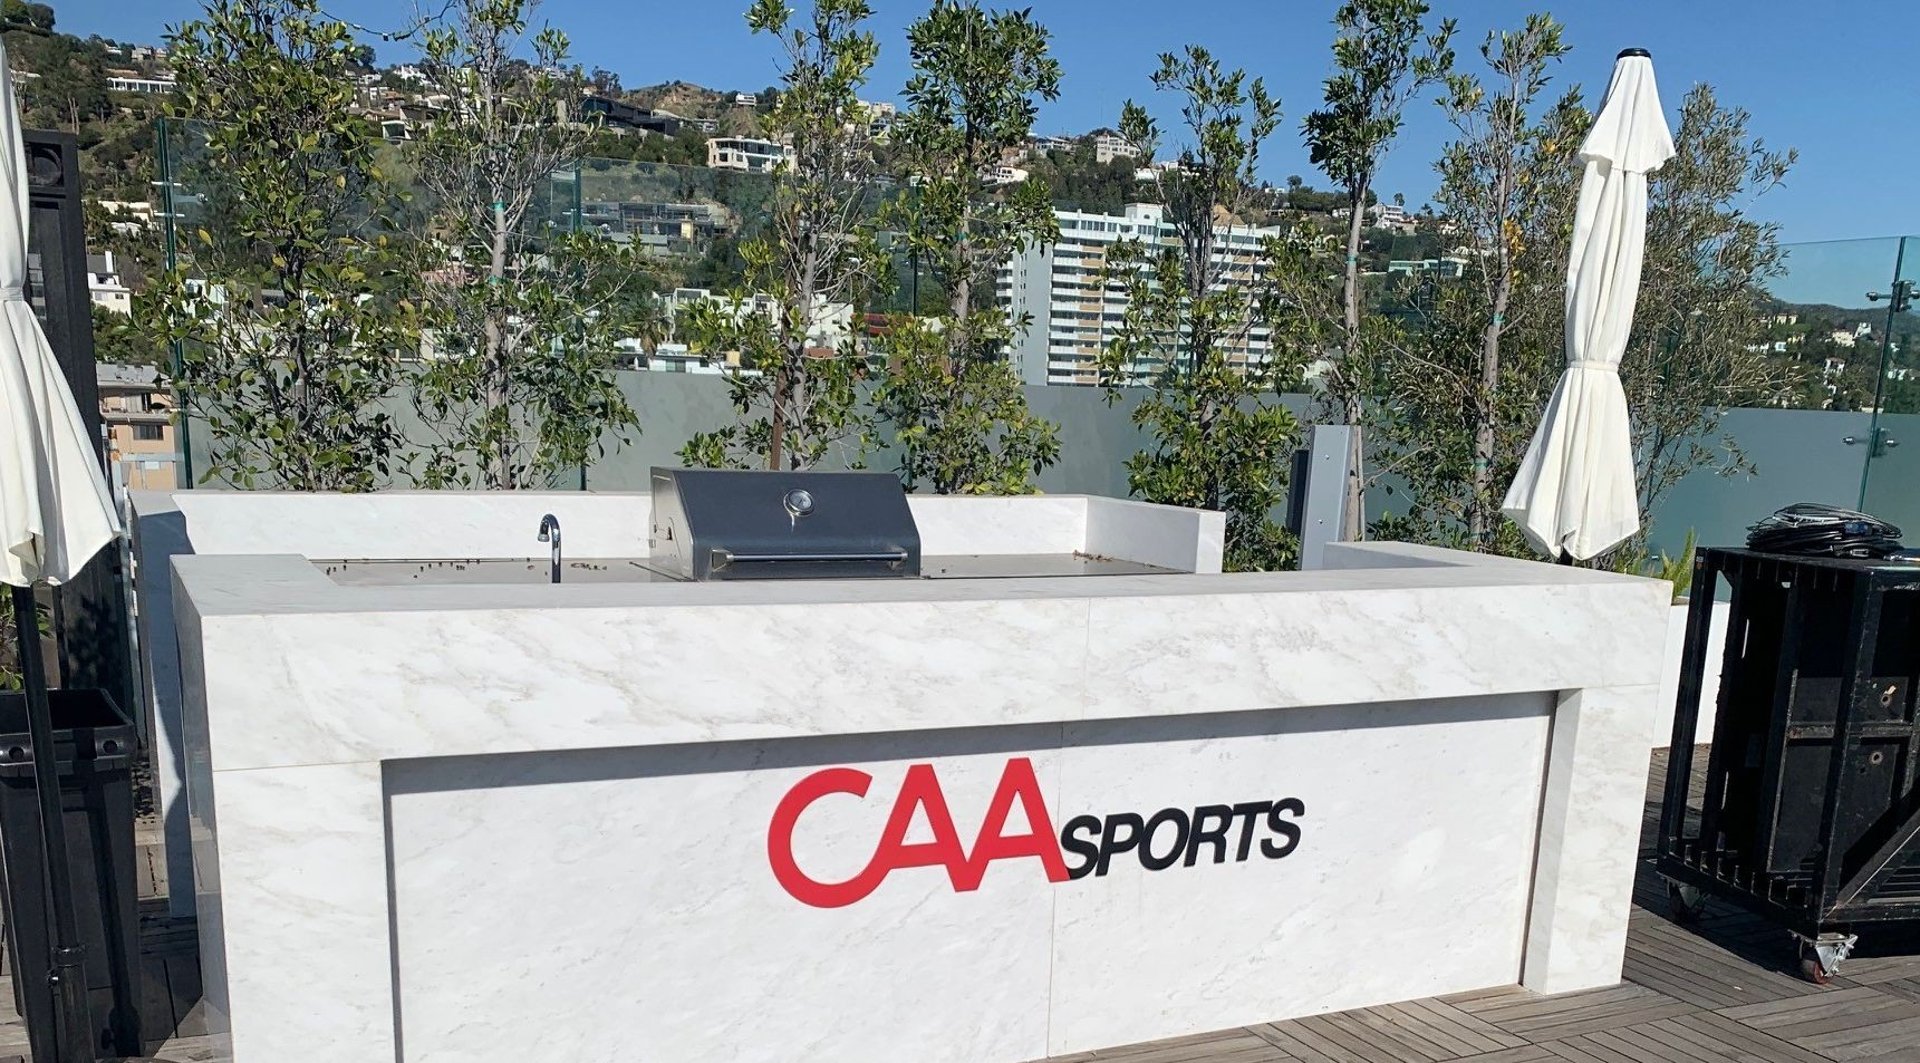 CAA Super Bowl House Sporting Event in Los Angeles, CA The Vendry